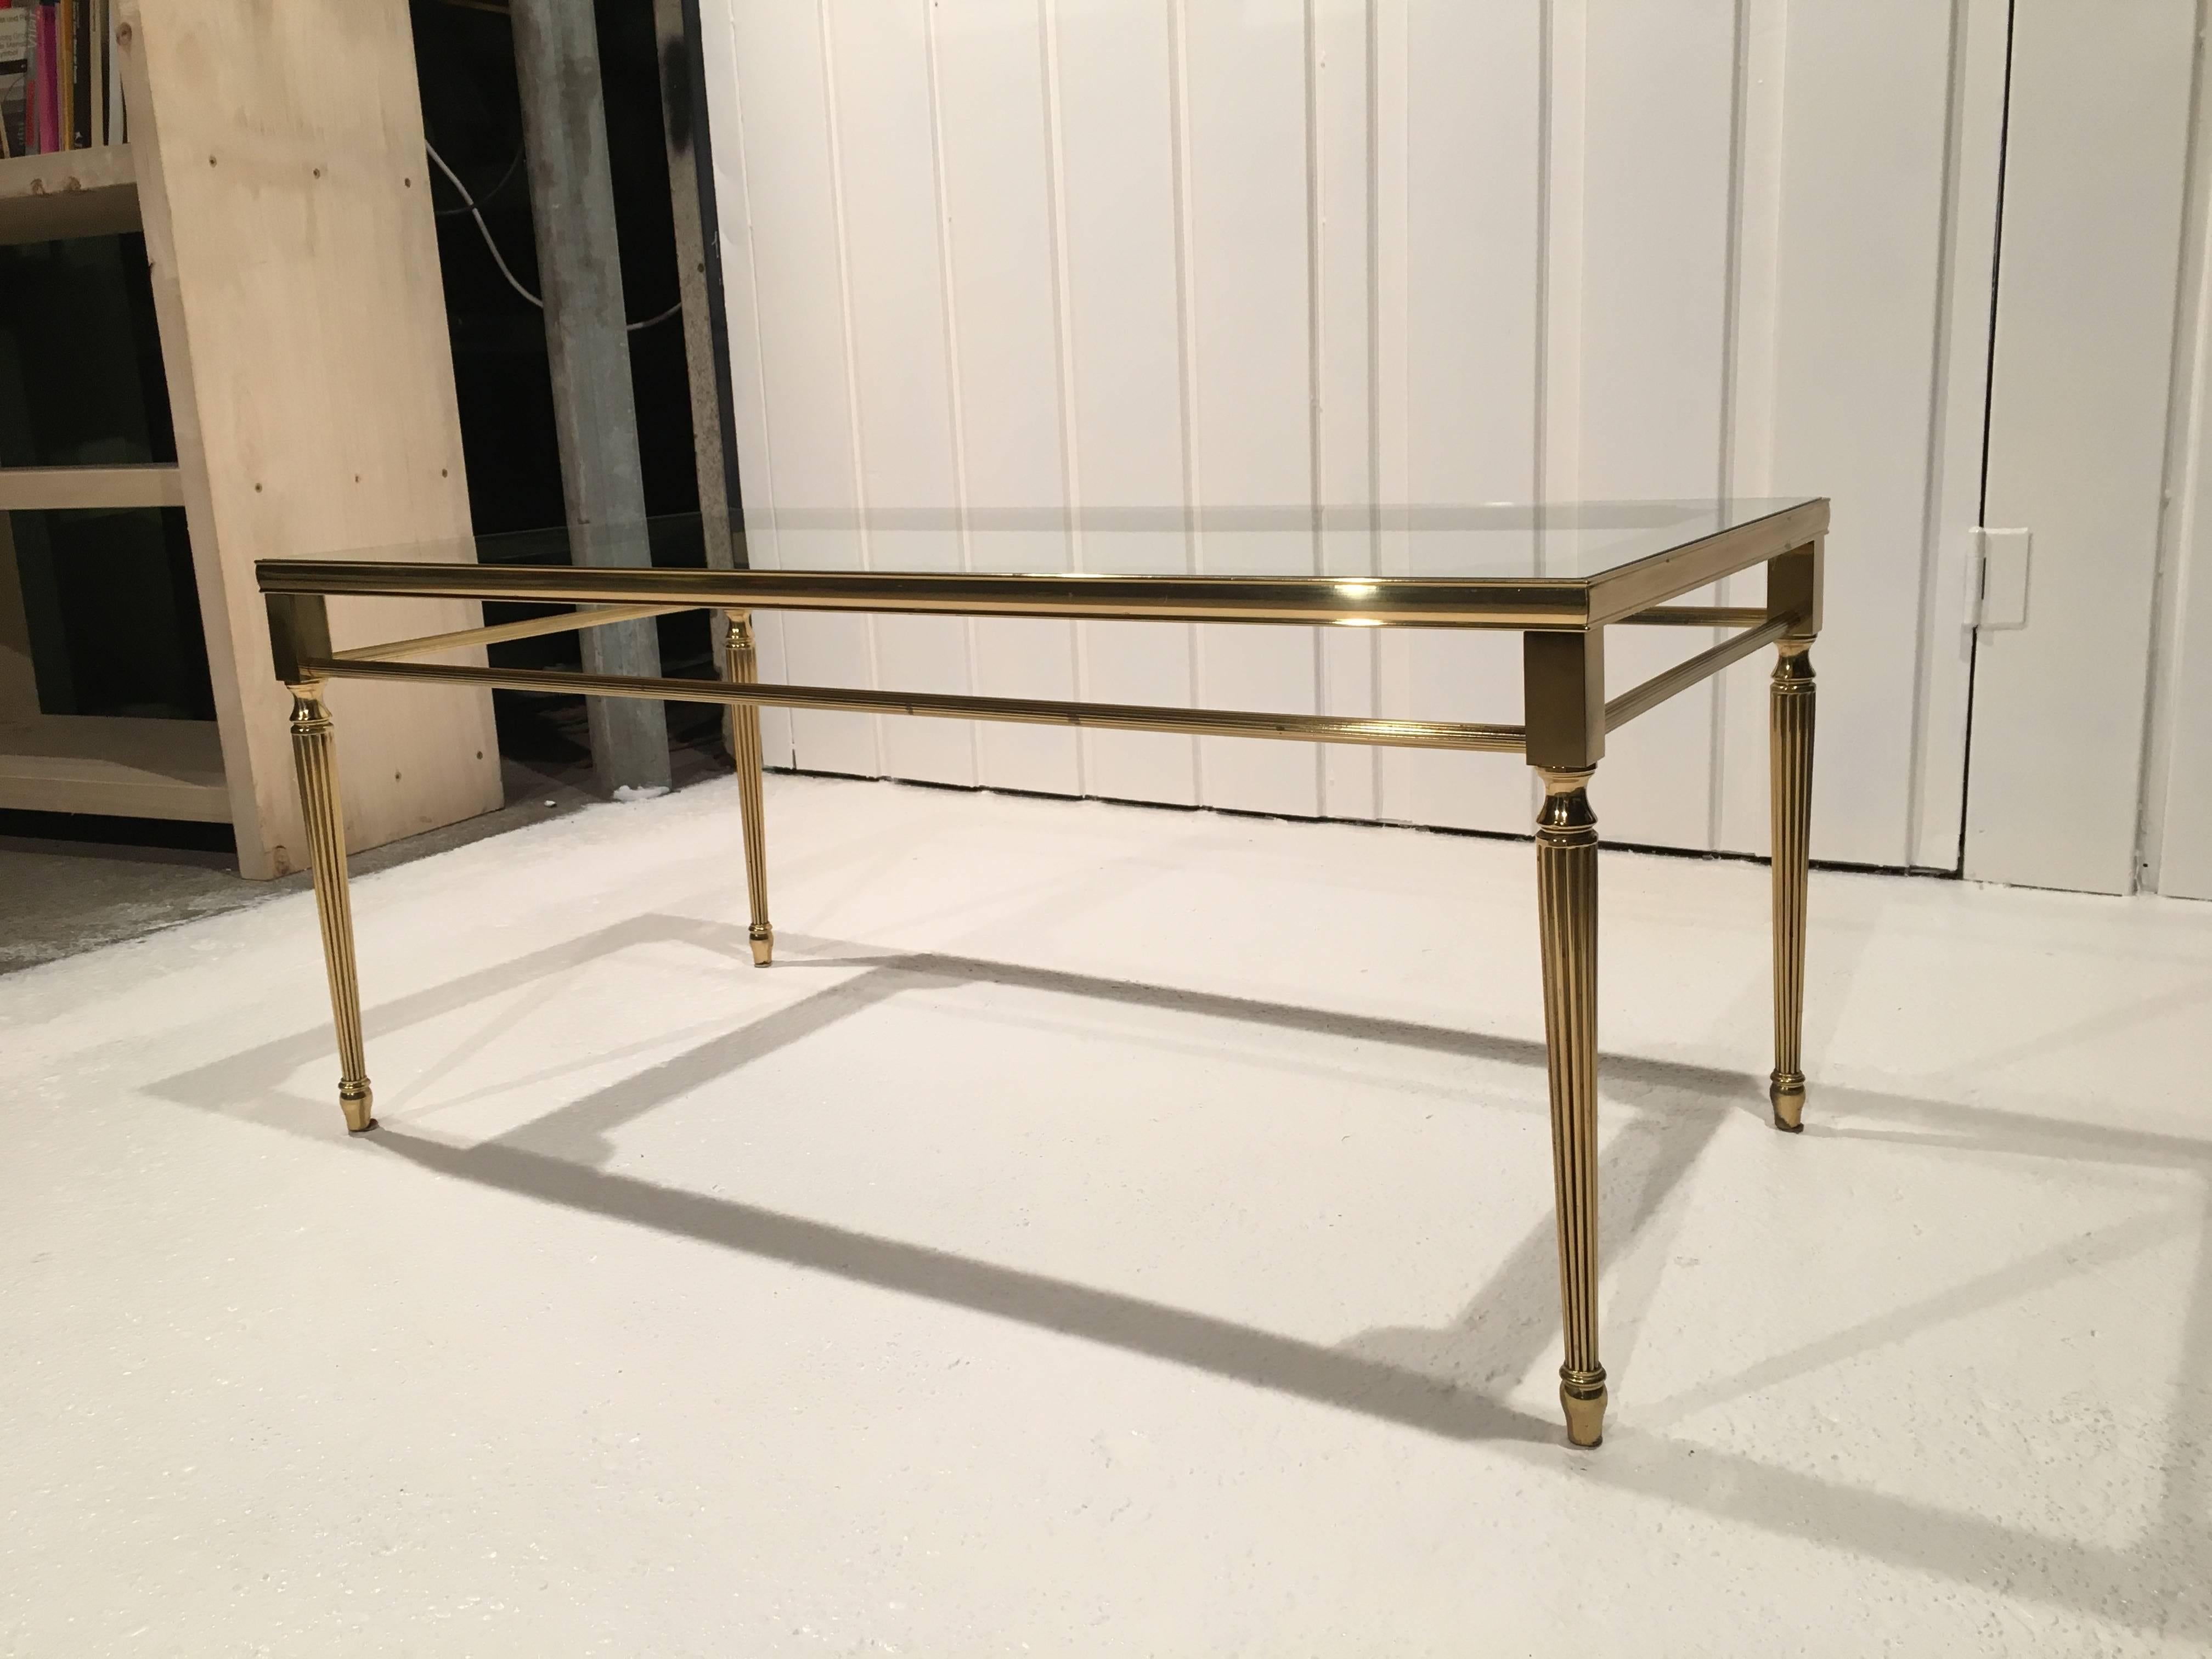 Antique coffee table in brass with glass top. Beautiful geometric details like feet and mirror in glass. Good condition, some stains from patina.